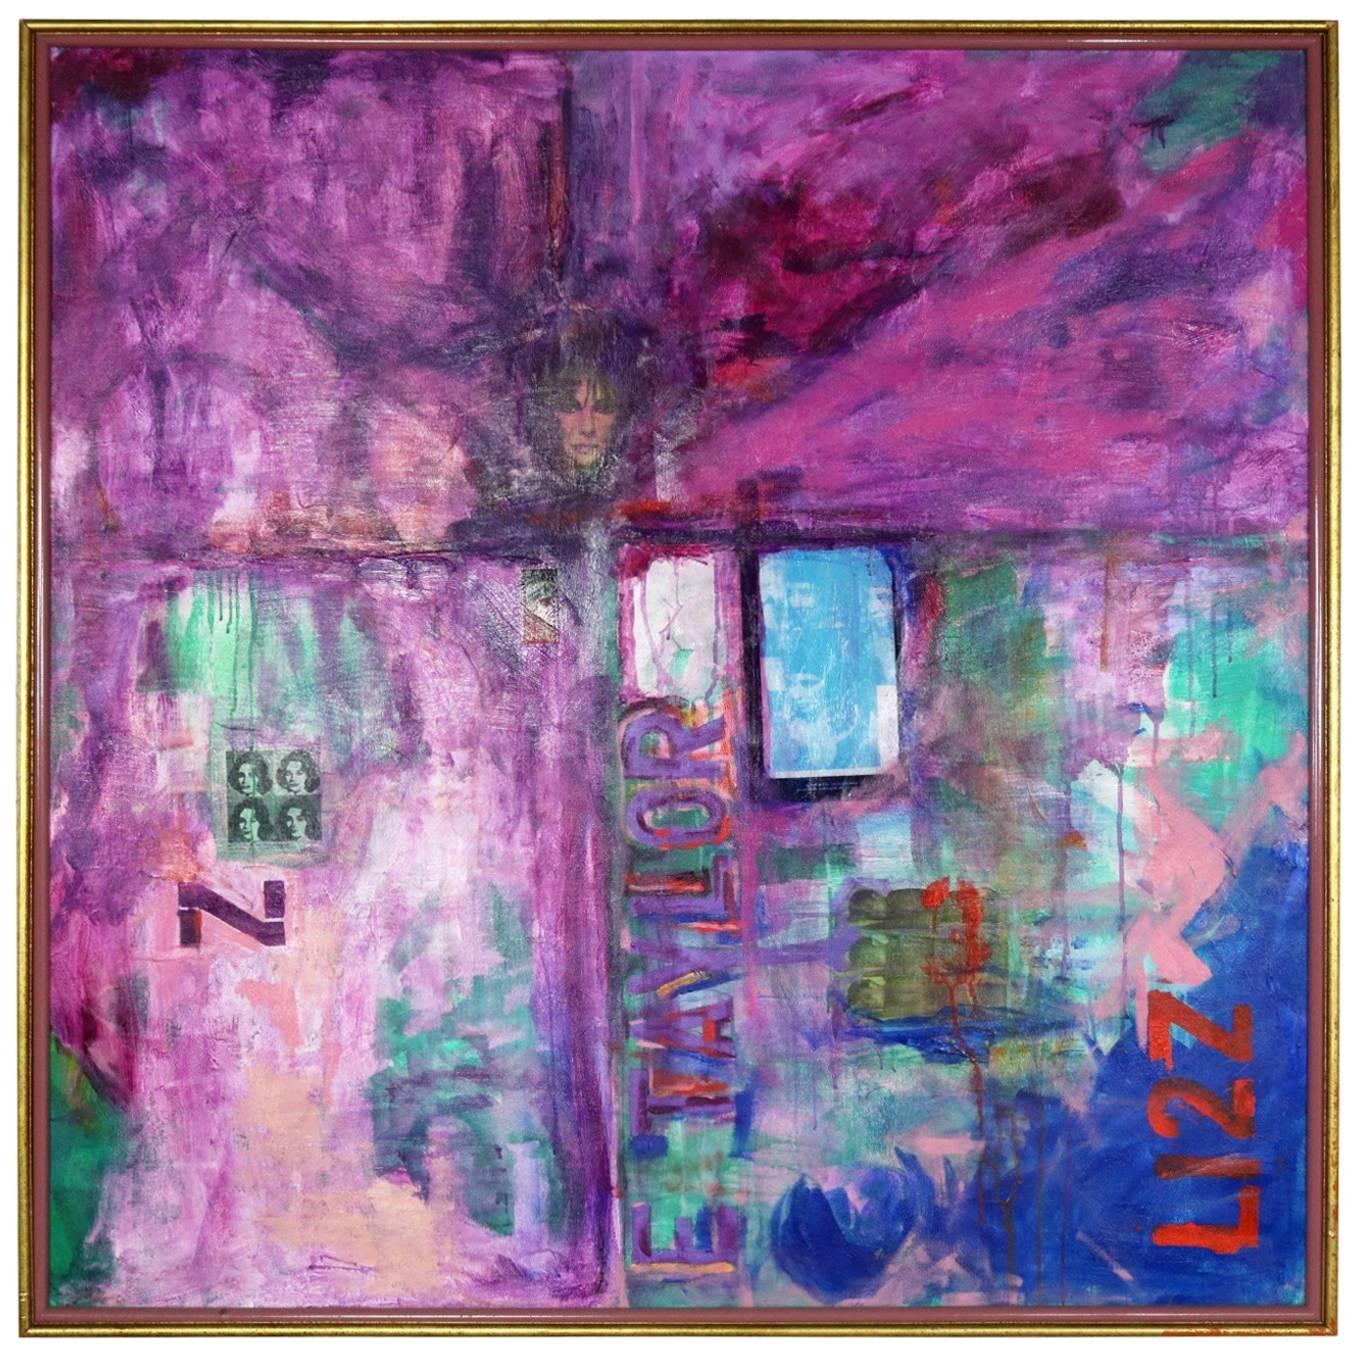 Lizz Mixed-Media Acrylic and Collage on Canvas by Ronald Frederick Dockter